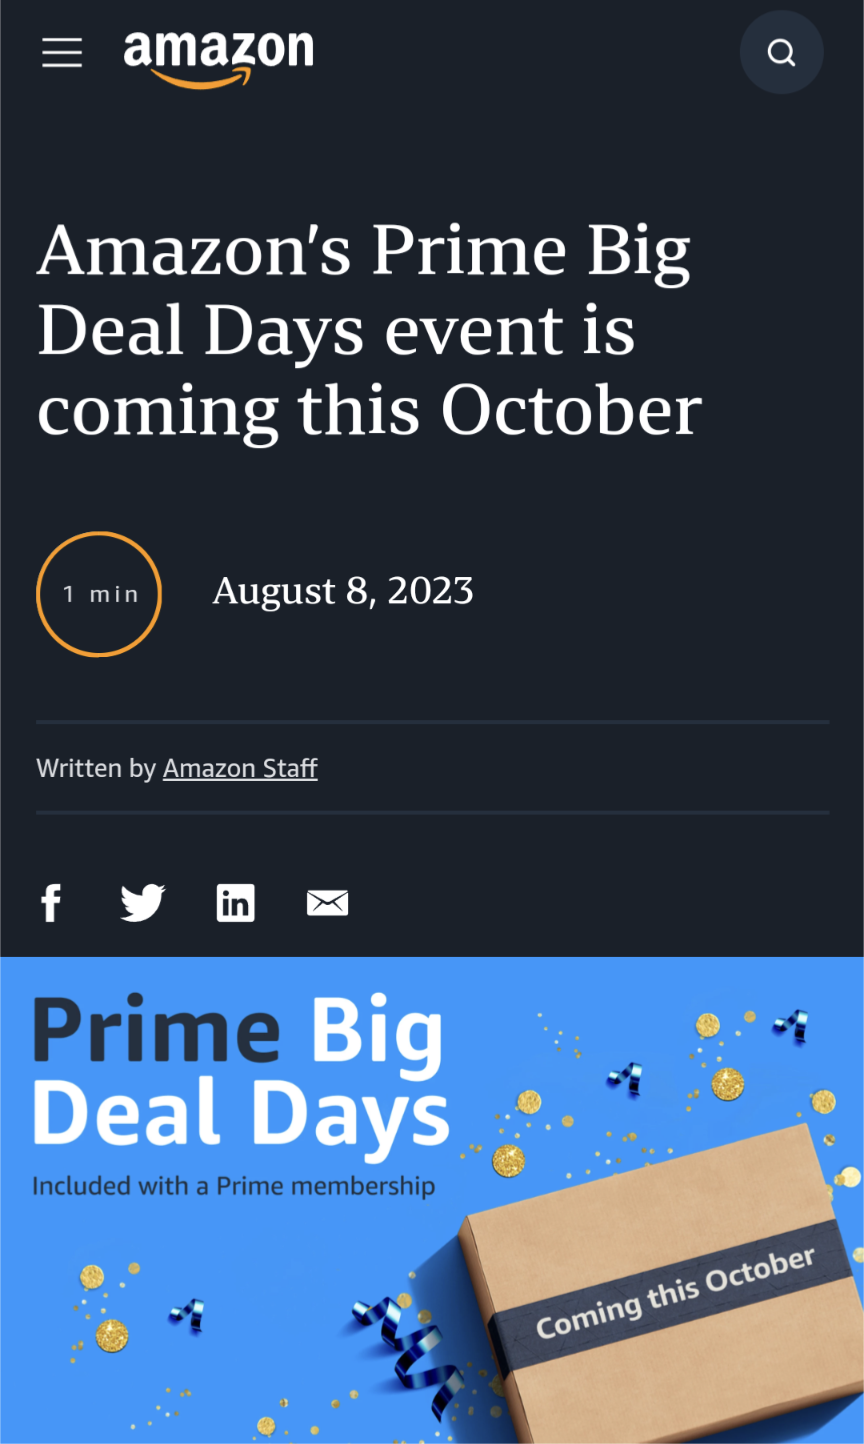 Prime Gaming August 2023 - what games are we getting?